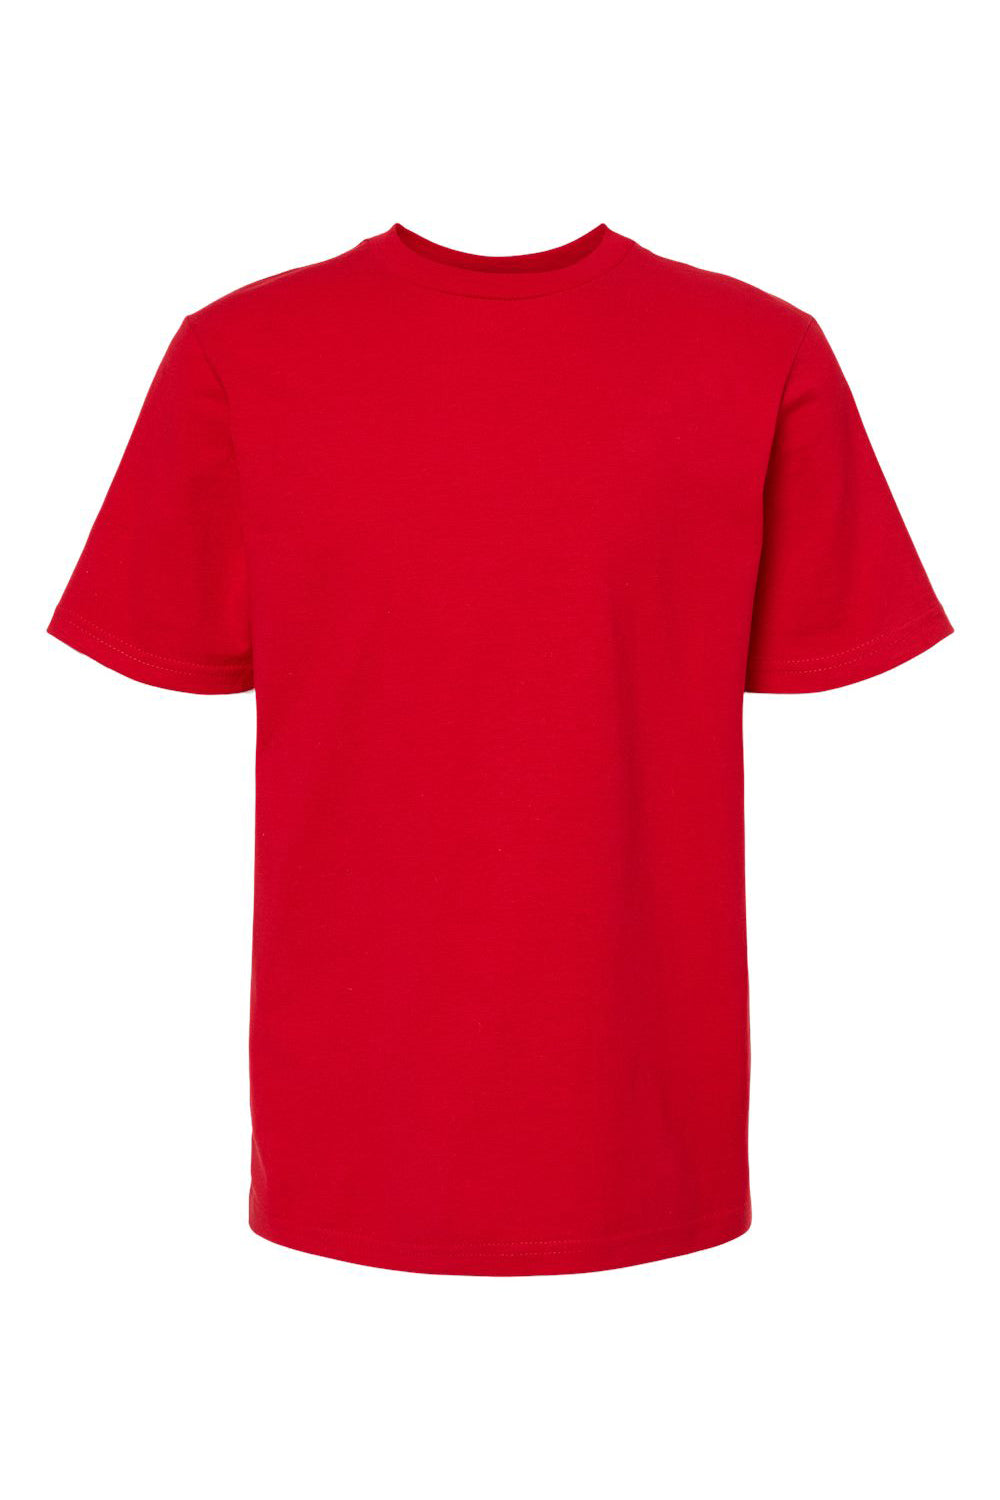 Tultex 295 Youth Jersey Short Sleeve Crewneck T-Shirt Red Flat Front